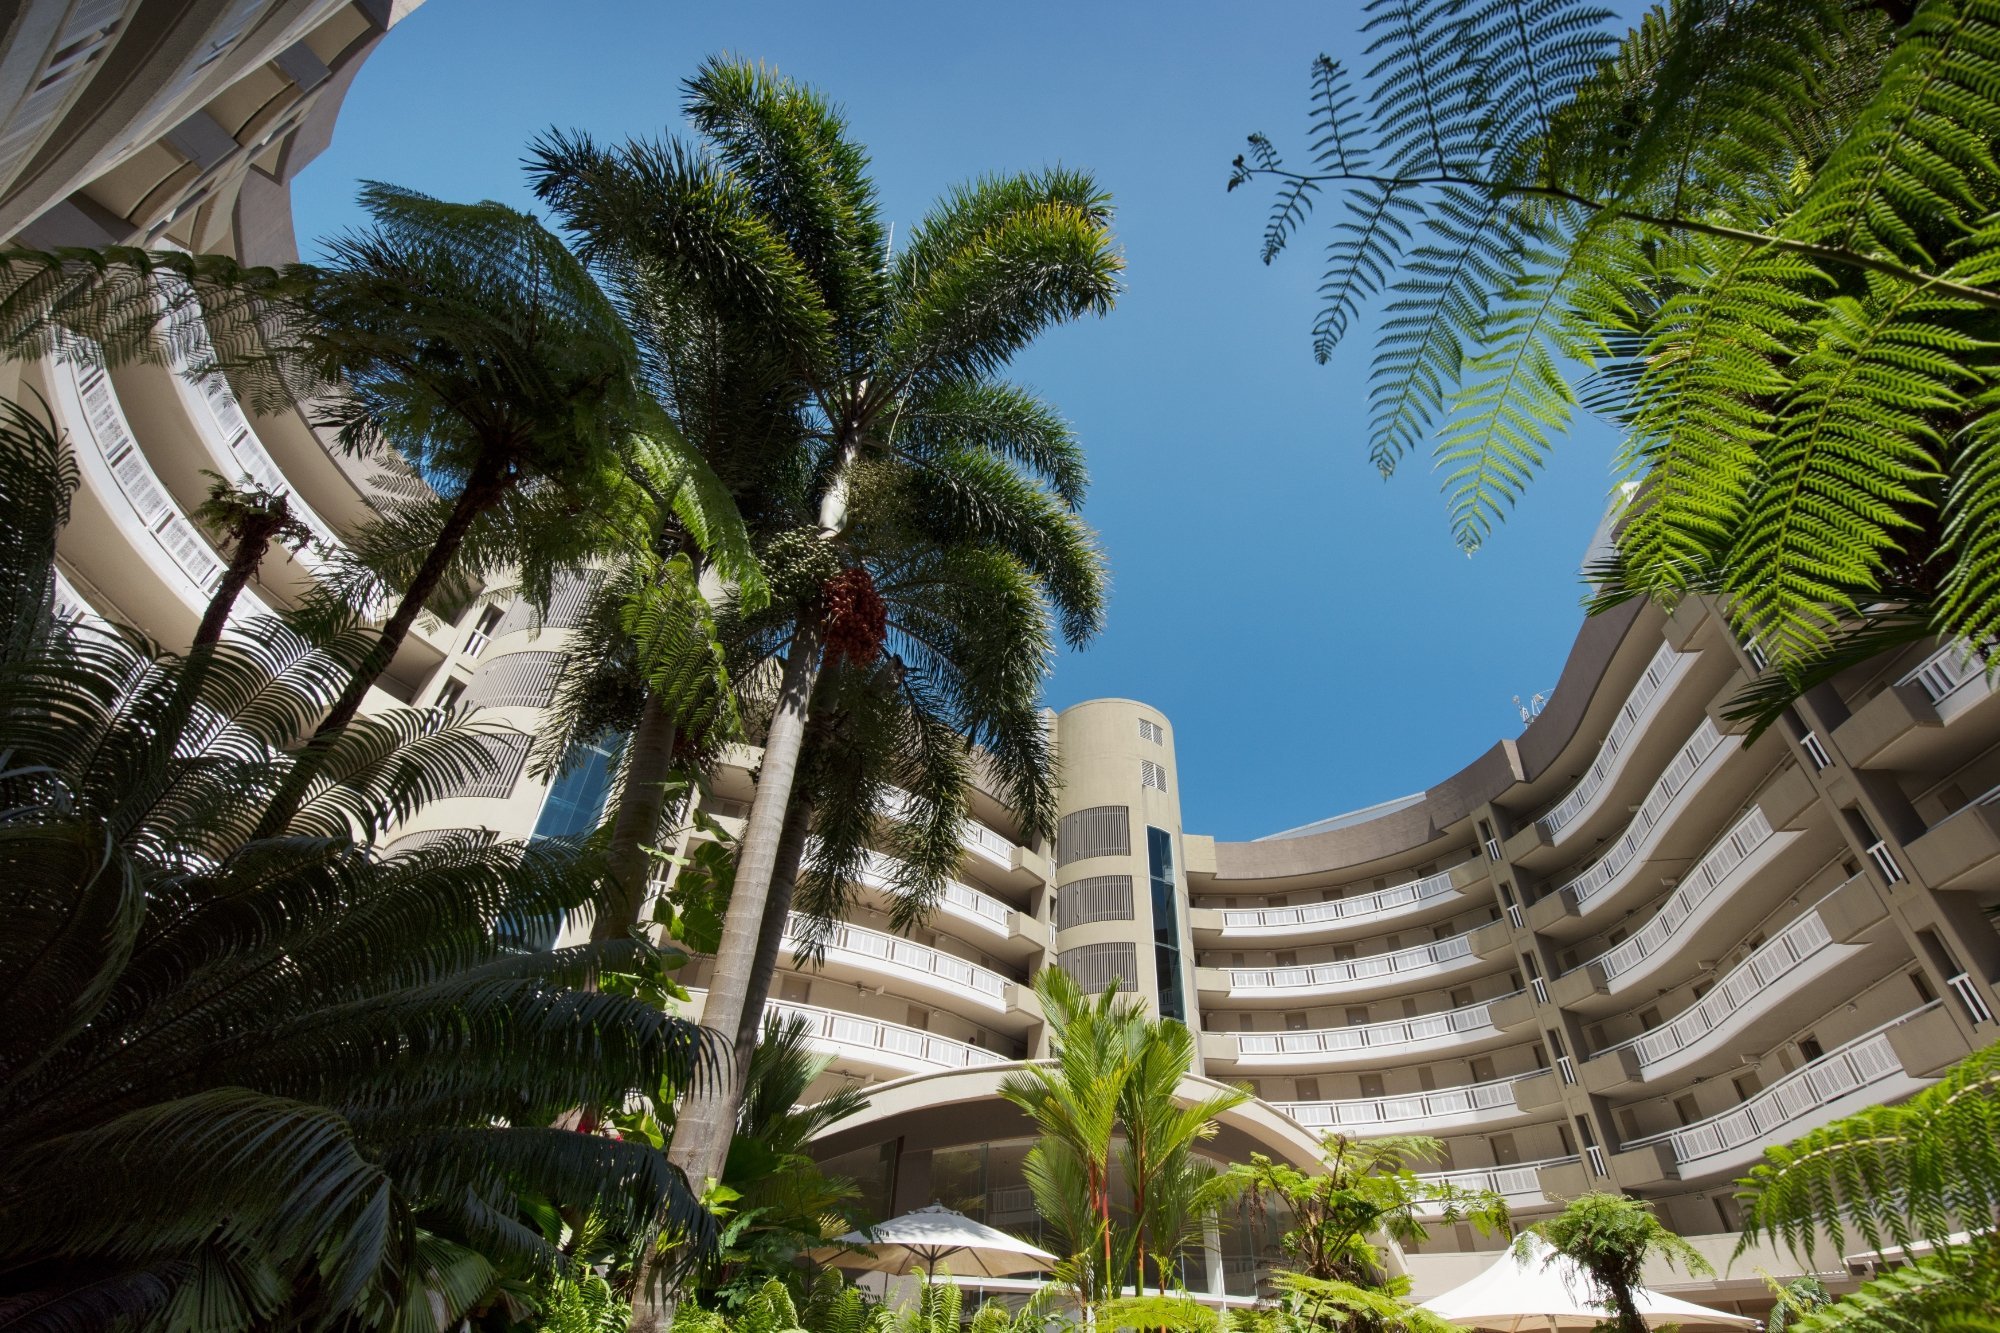 Photo of DoubleTree by Hilton Cairns, Cairns, Queensland, Australia